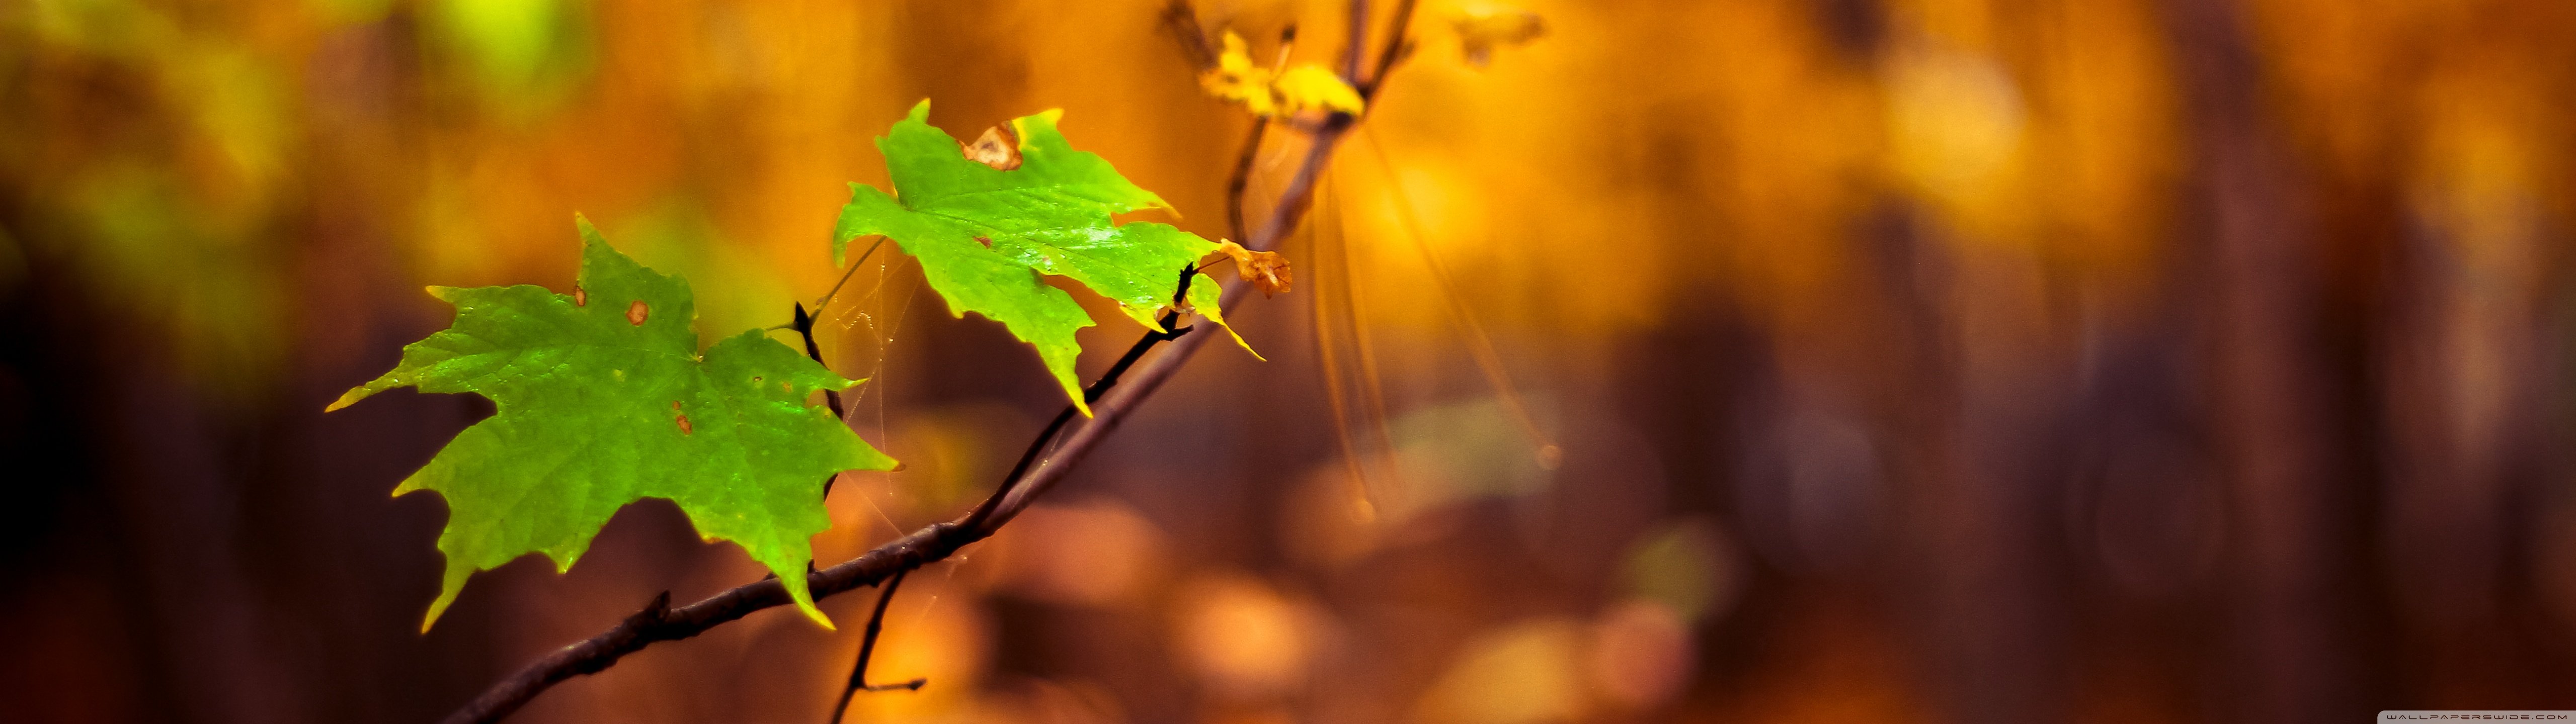 Green Leaves Autumn Ultra HD Desktop Background Wallpaper for: Multi Display, Dual Monitor, Tablet